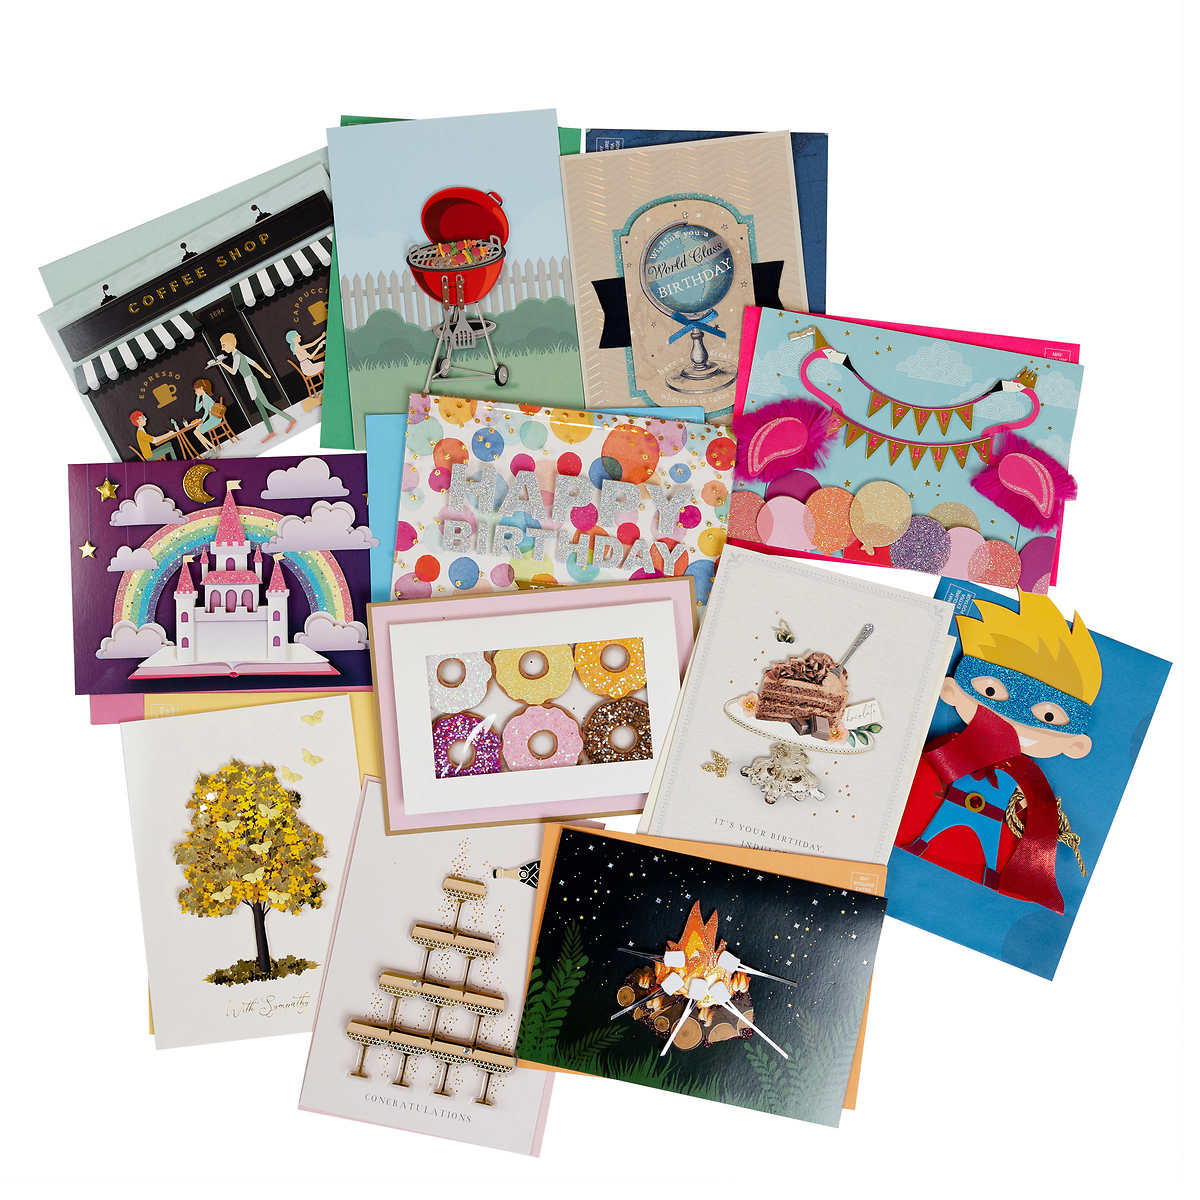 Purchase Wholesale boxed thank you cards. Free Returns & Net 60 Terms on